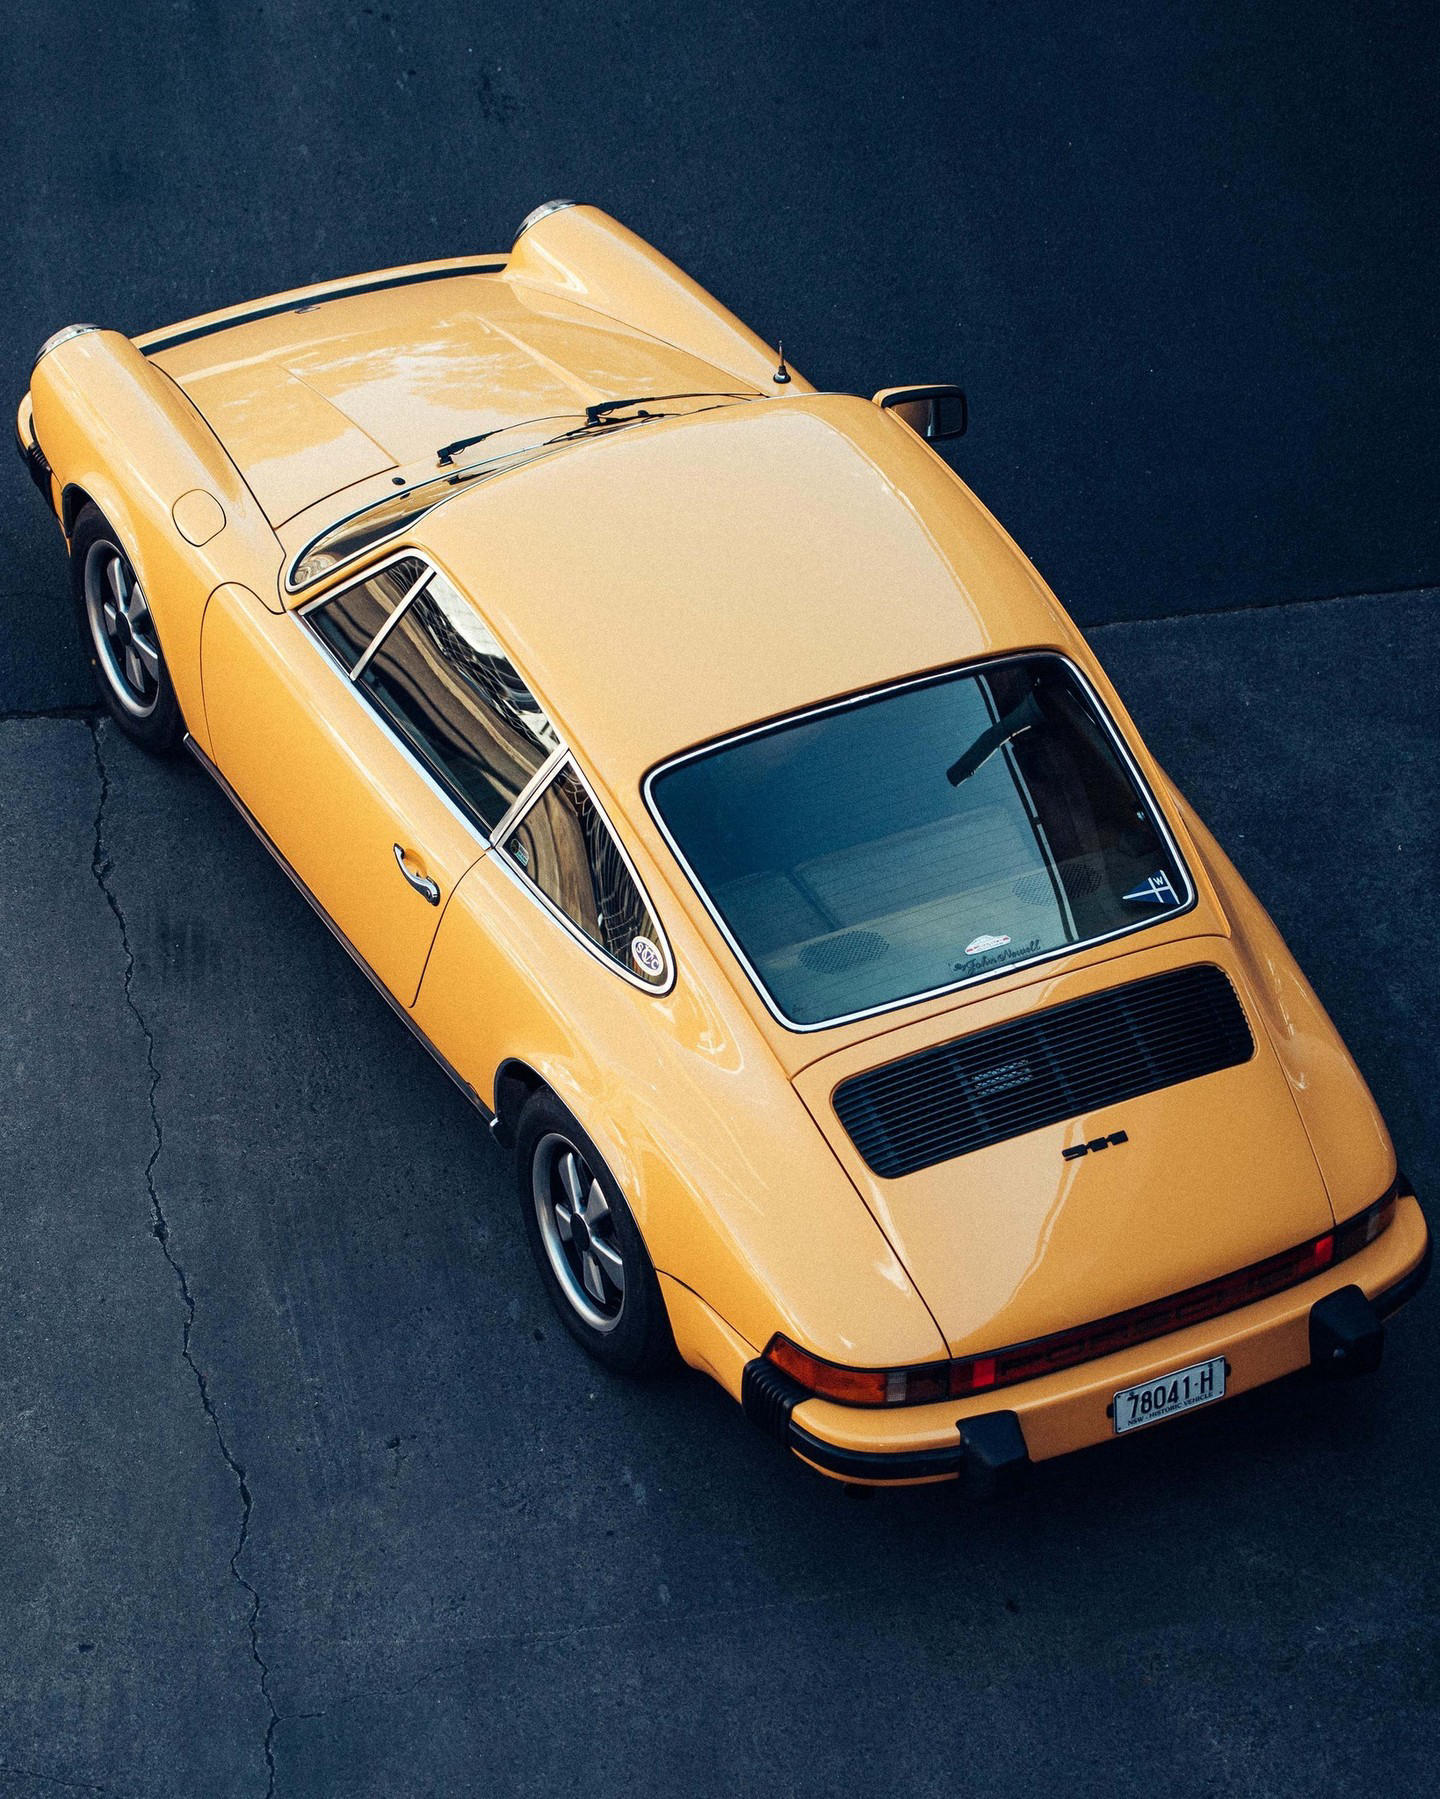 Porsche - Meet Lesley – the classic 1977 911 that #thomaswalk named after the lady who sold it to hi